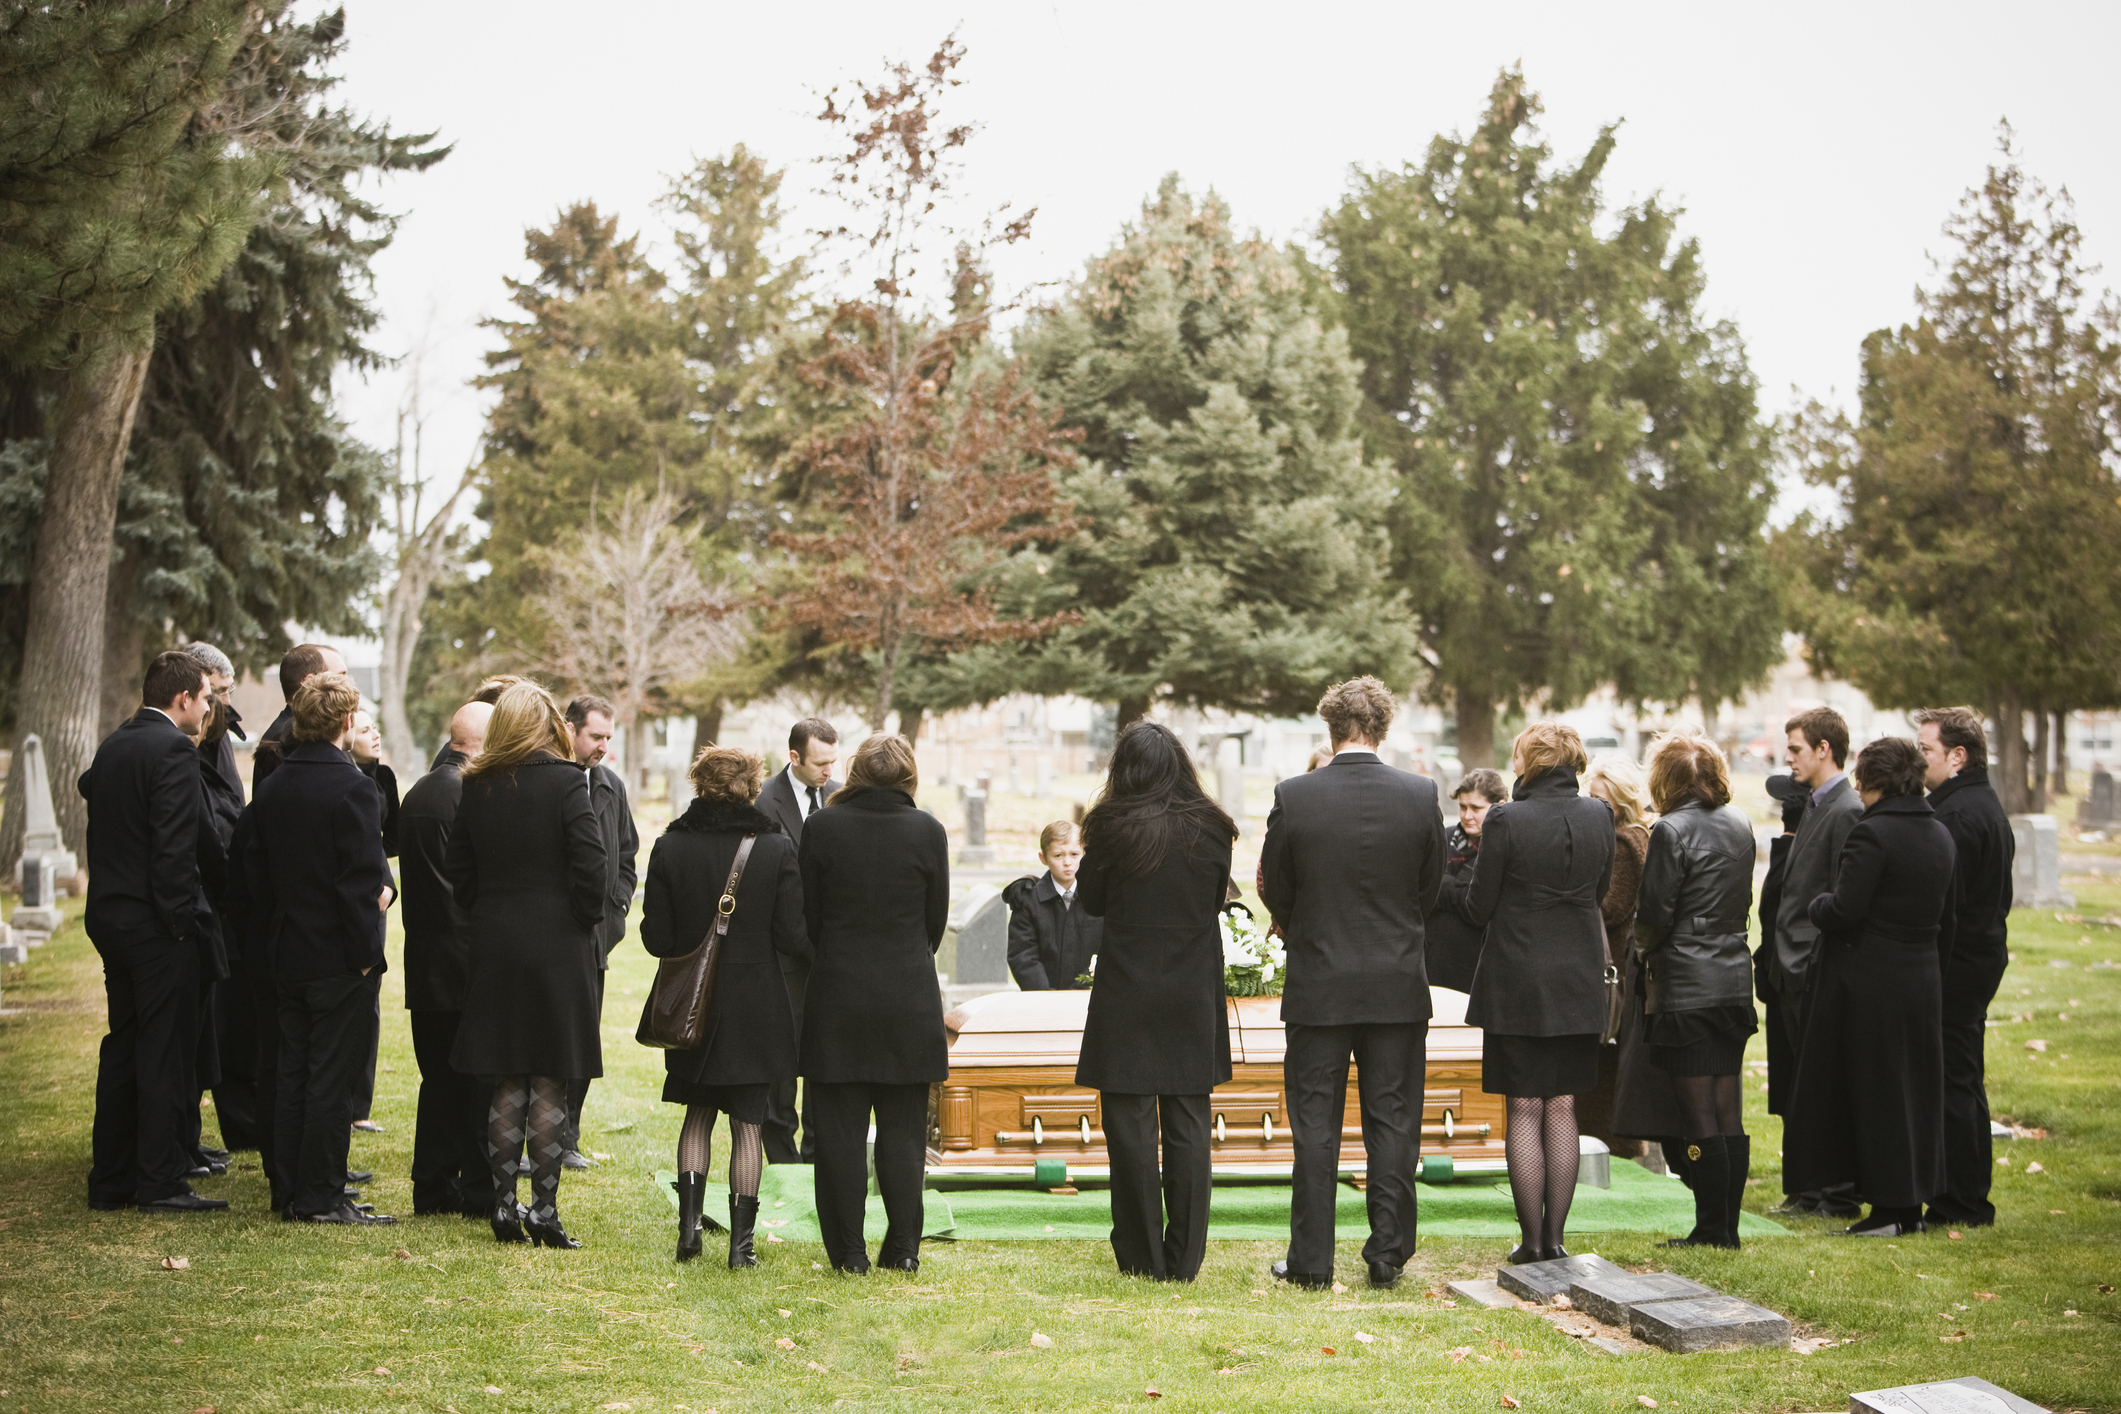 Group of people at a funeral service around a casket outdoors, expressing remembrance